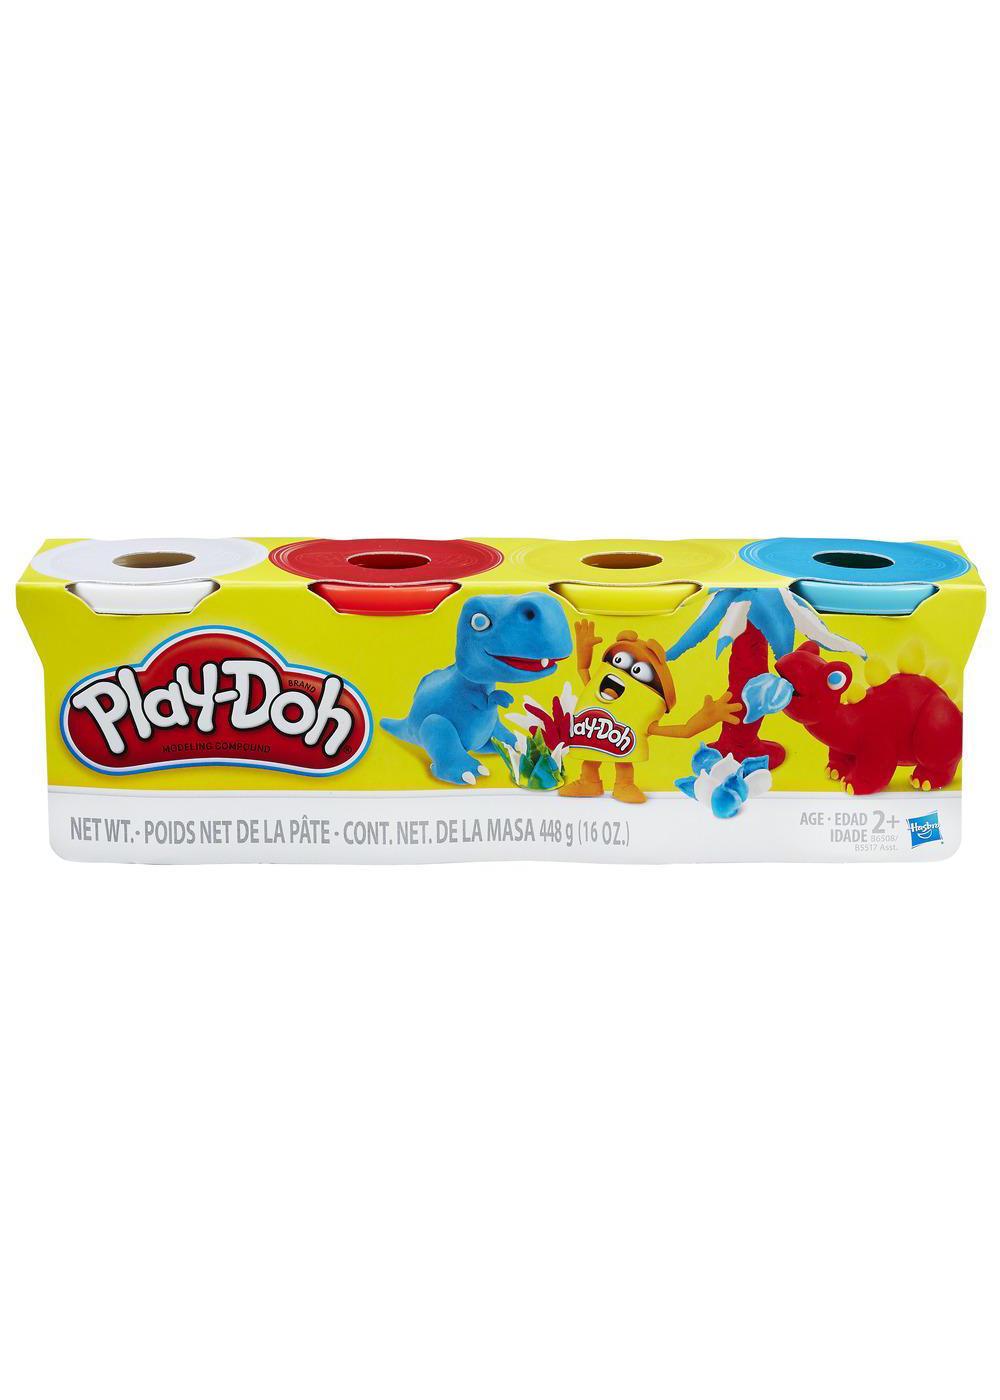 Play-Doh Classic Colors; image 1 of 2